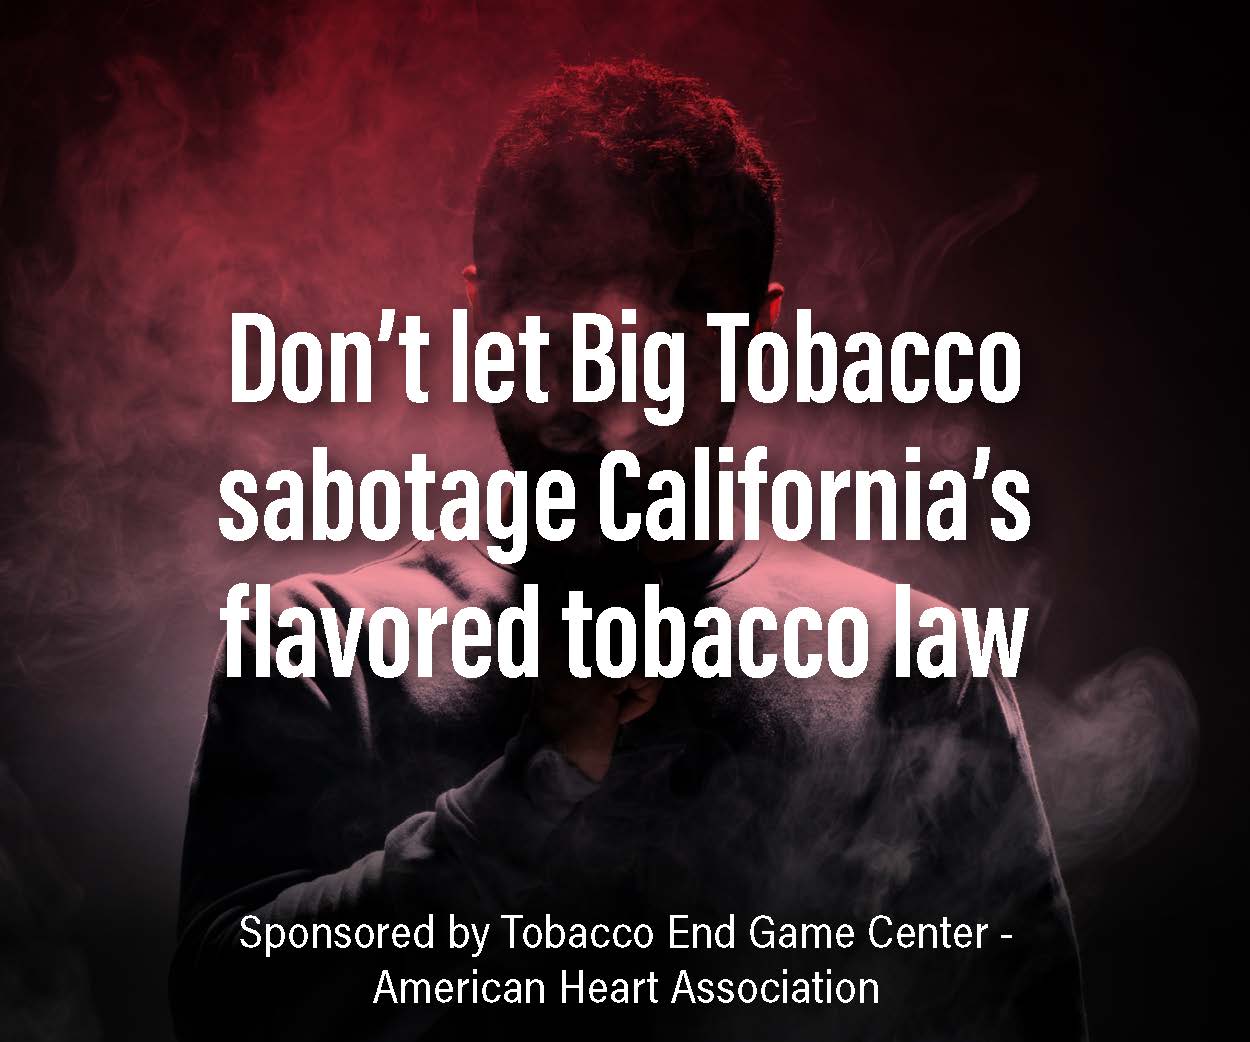 Don't let Big Tobacco sabotage California's flavored tobacco law